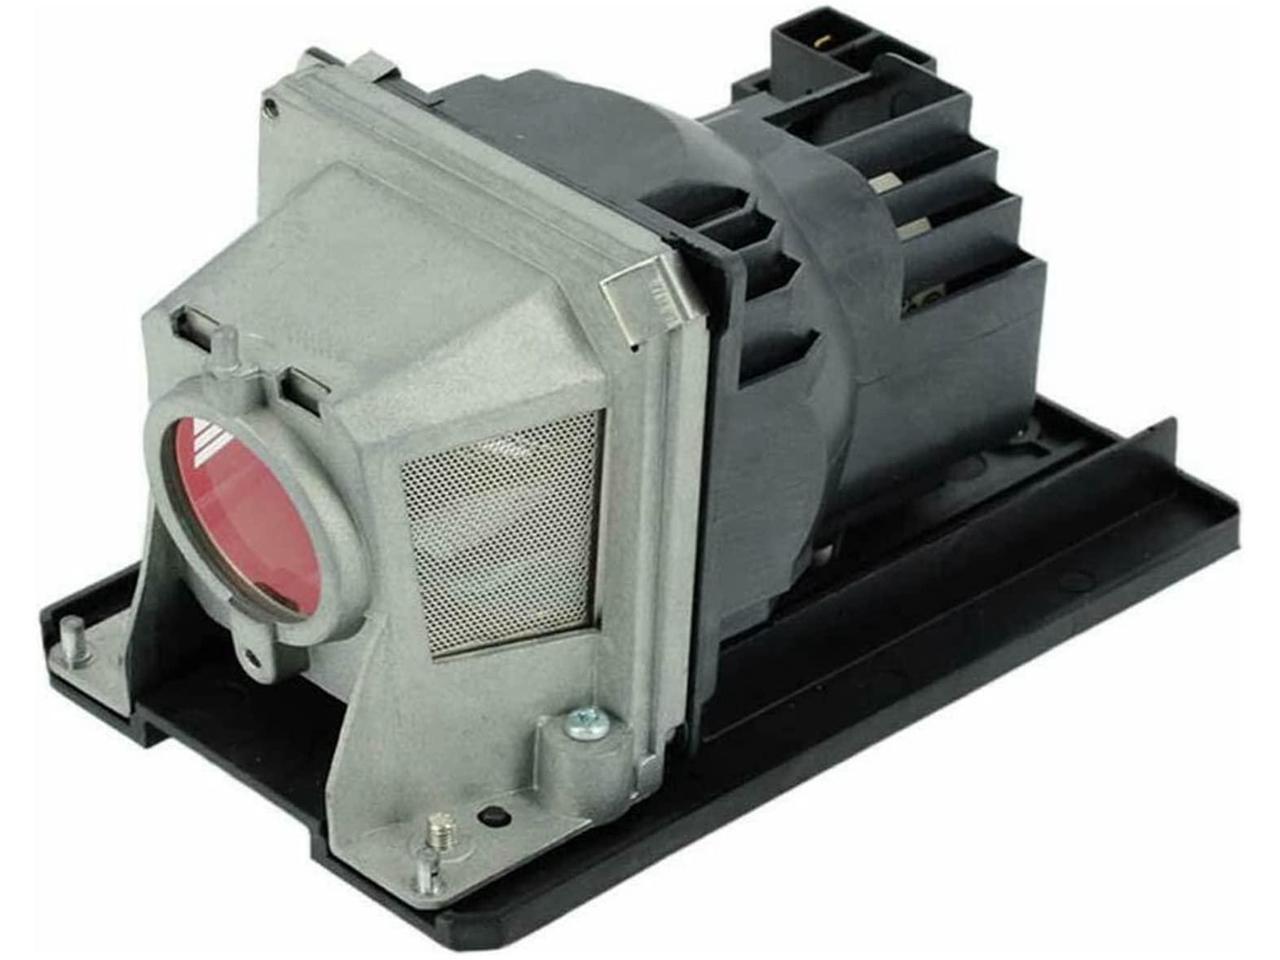 NP215G NP13LP Replacement Lamp for NEC Projectors 